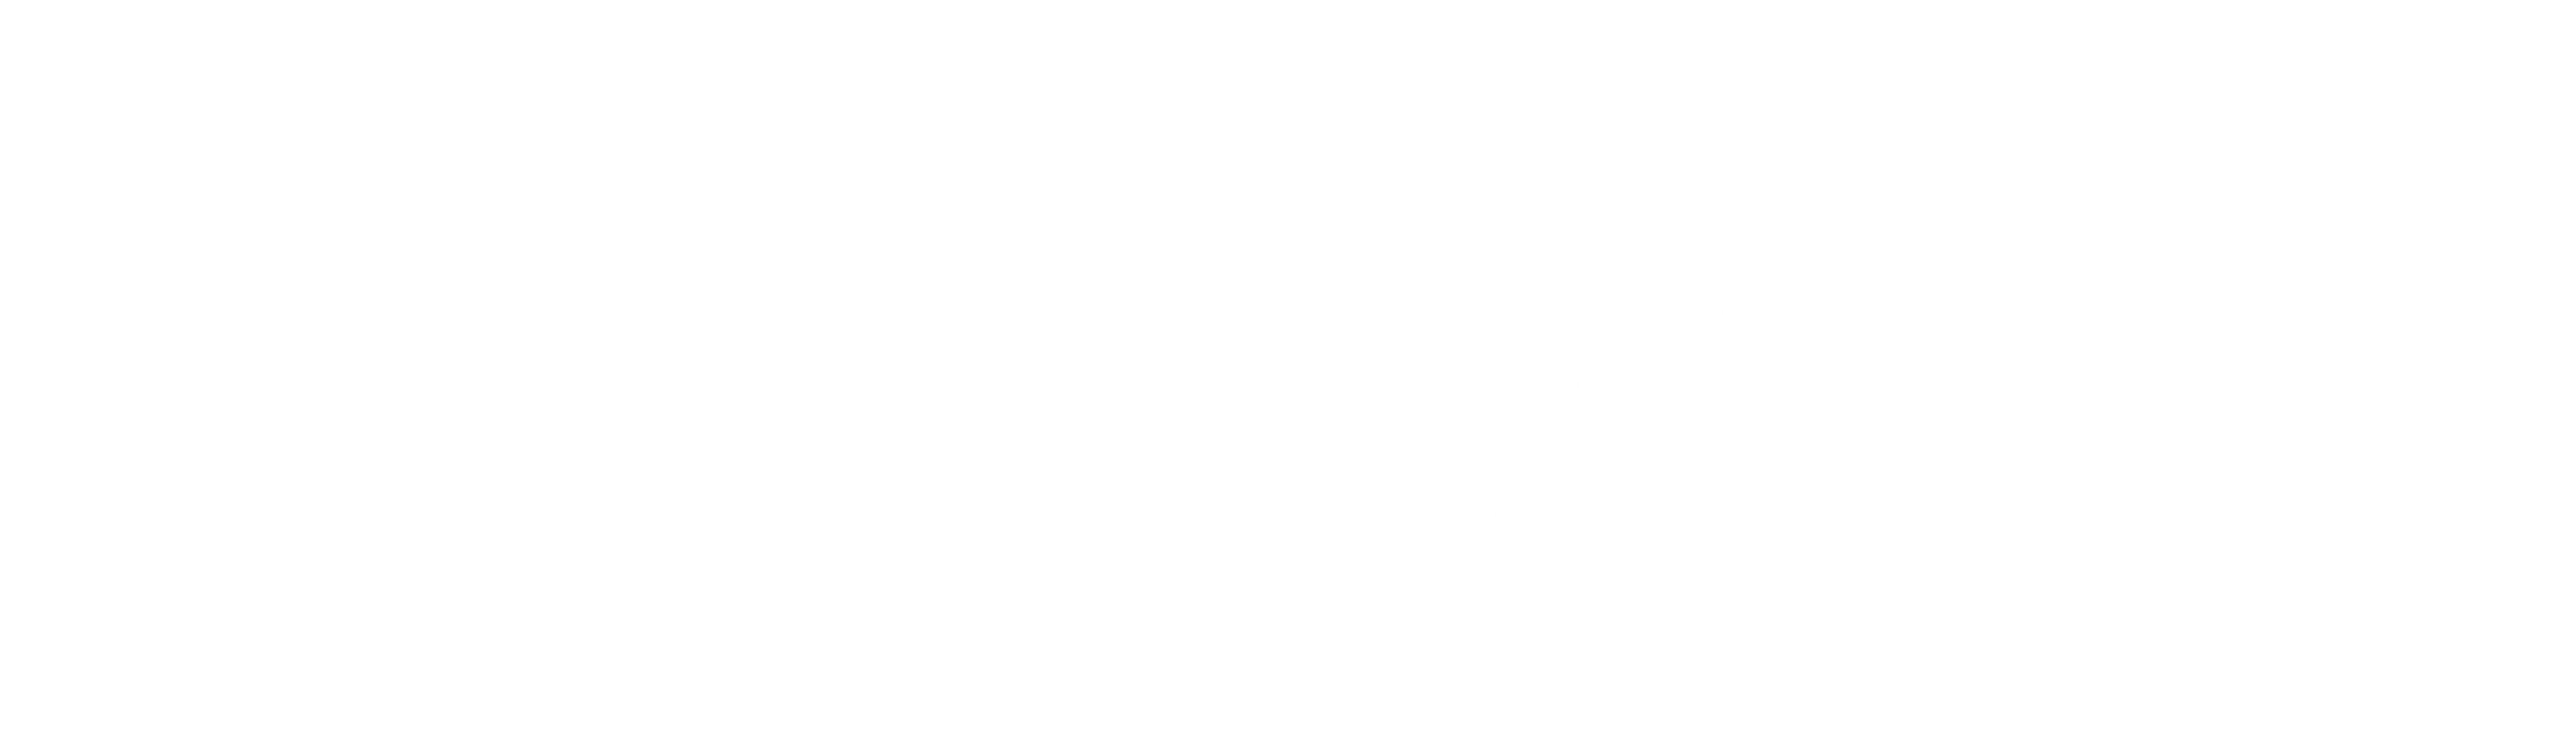 Skin Official